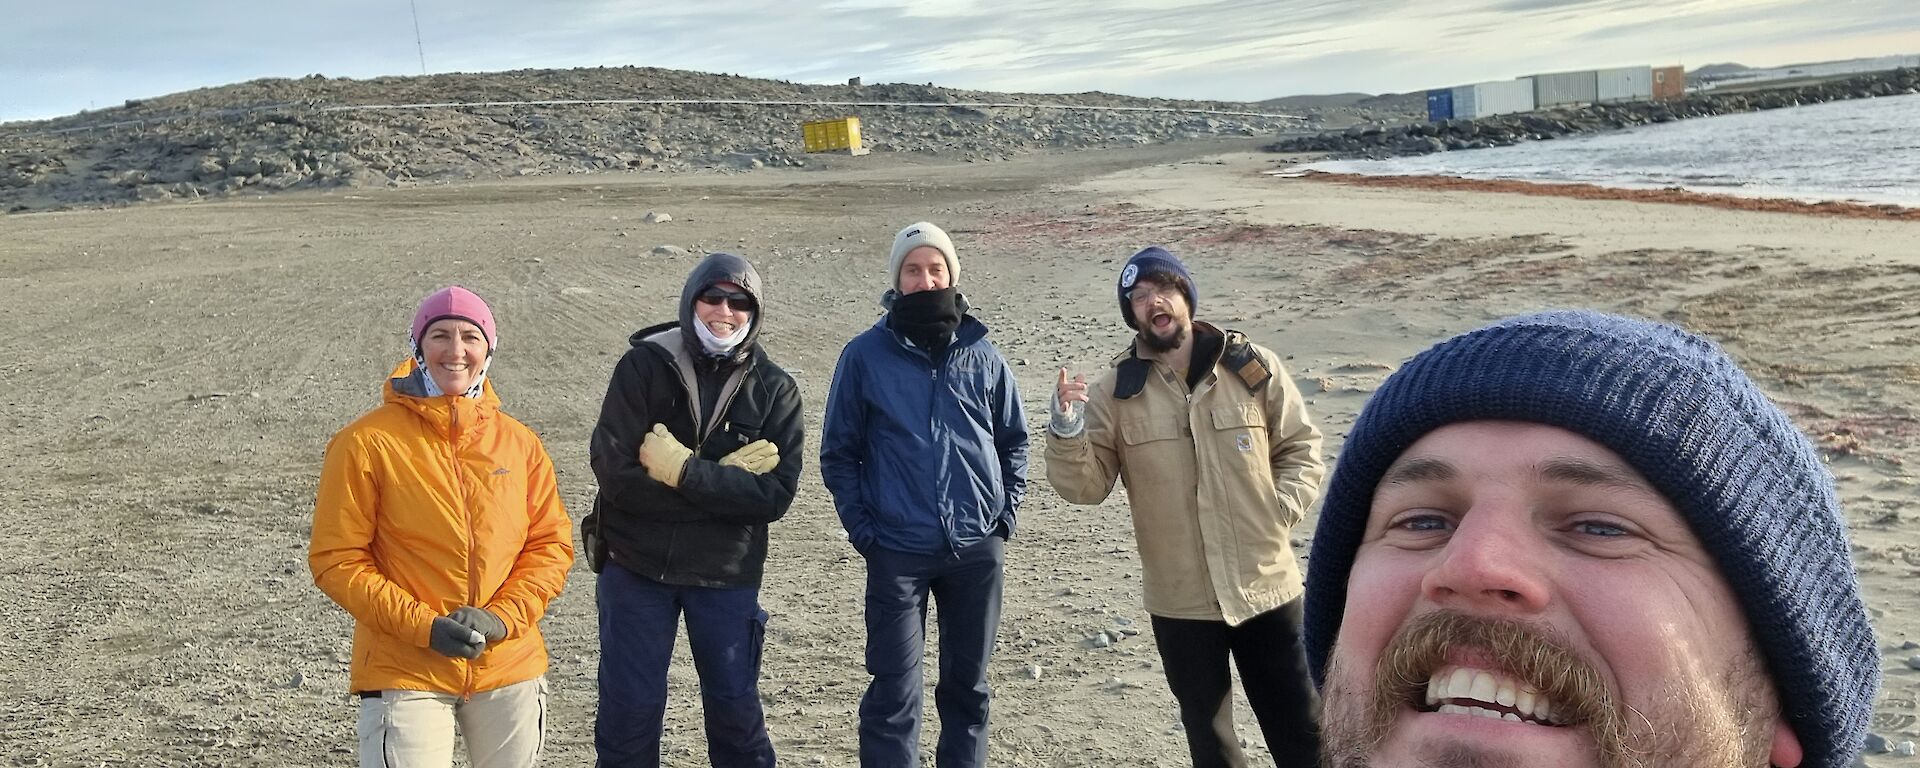 A group of five smiling people standing on a sandy beach in Antarctica with a hill in the background.